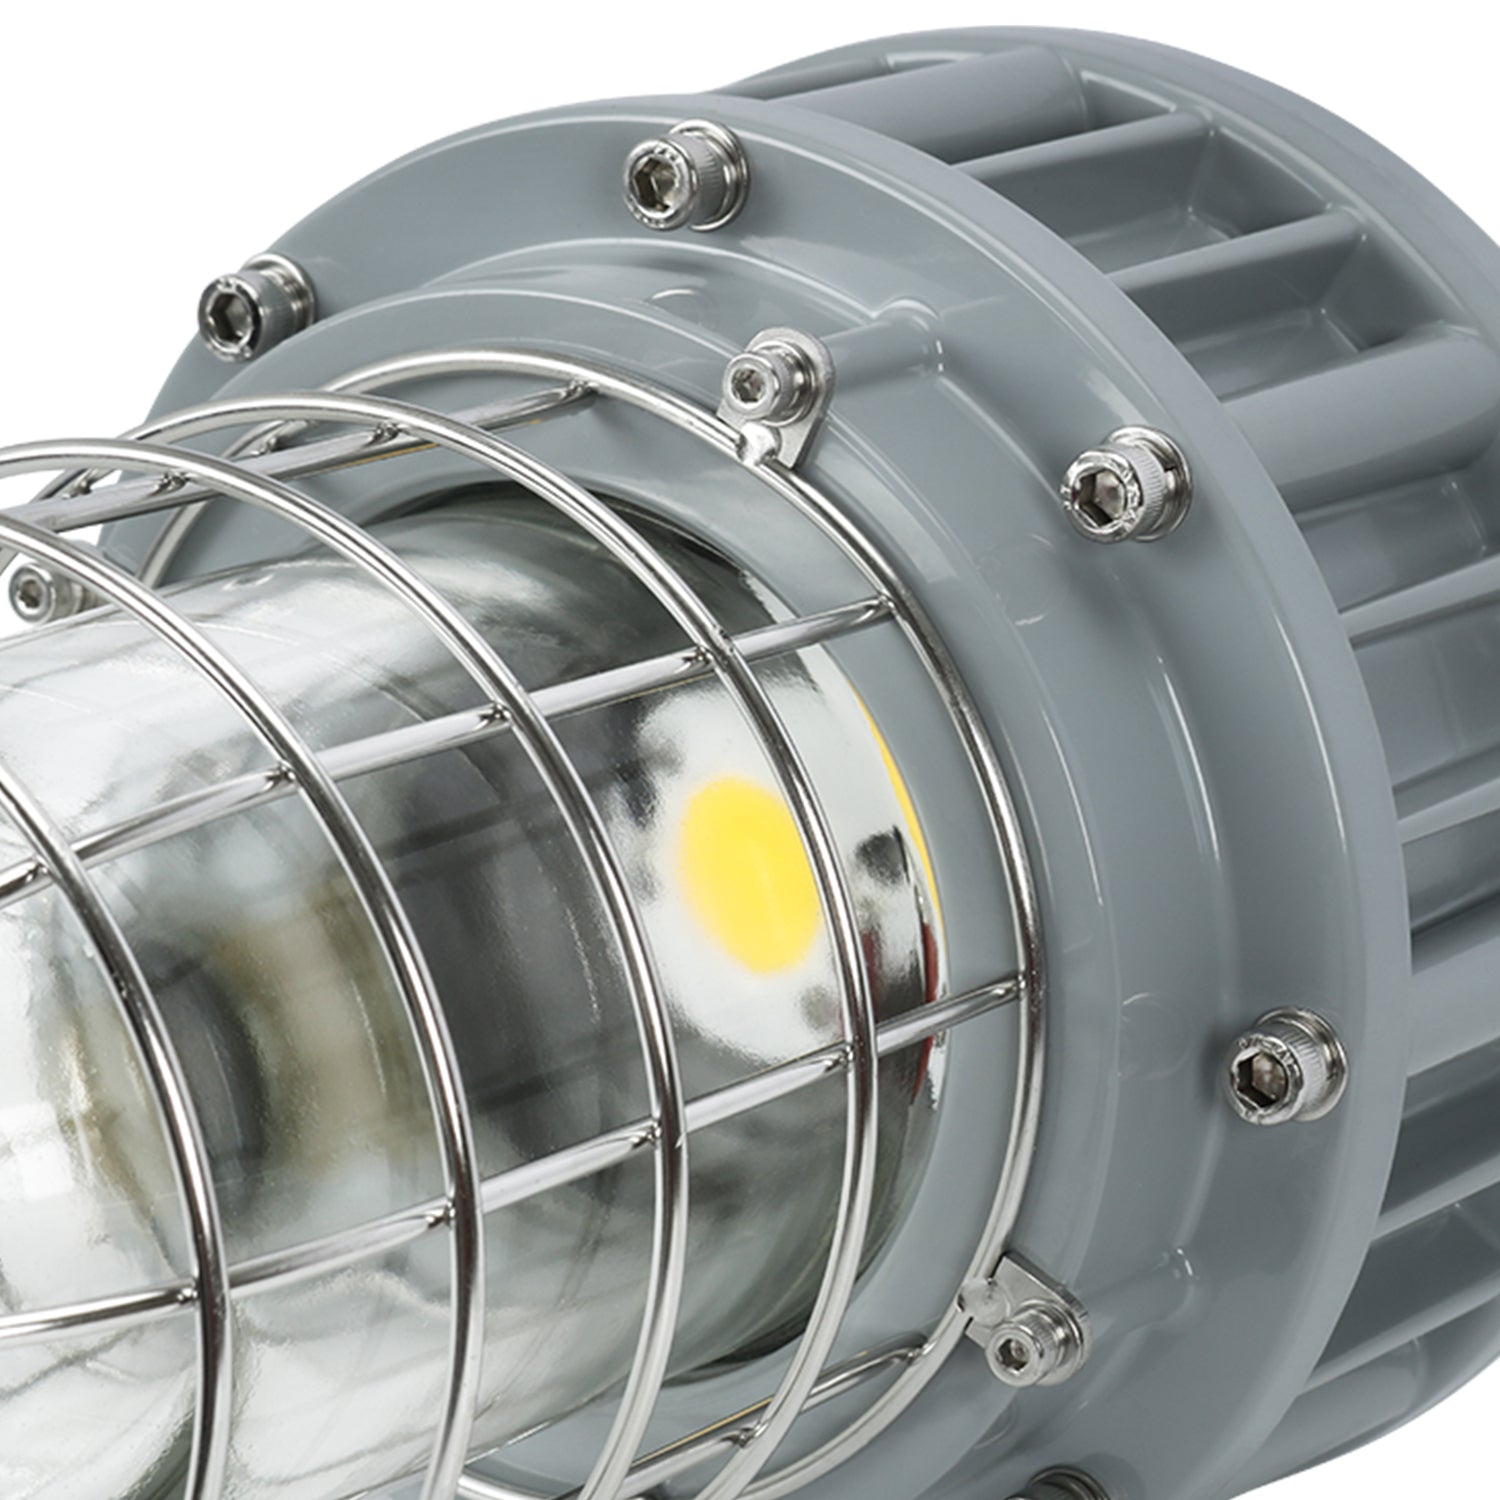 G Series 30W Dimmable LED Explosion Proof Jelly Jar Light: High-Quality Lighting Solution for Hazardous Locations with 4050LM and IP66 Protection, Ideal for Industrial Environments